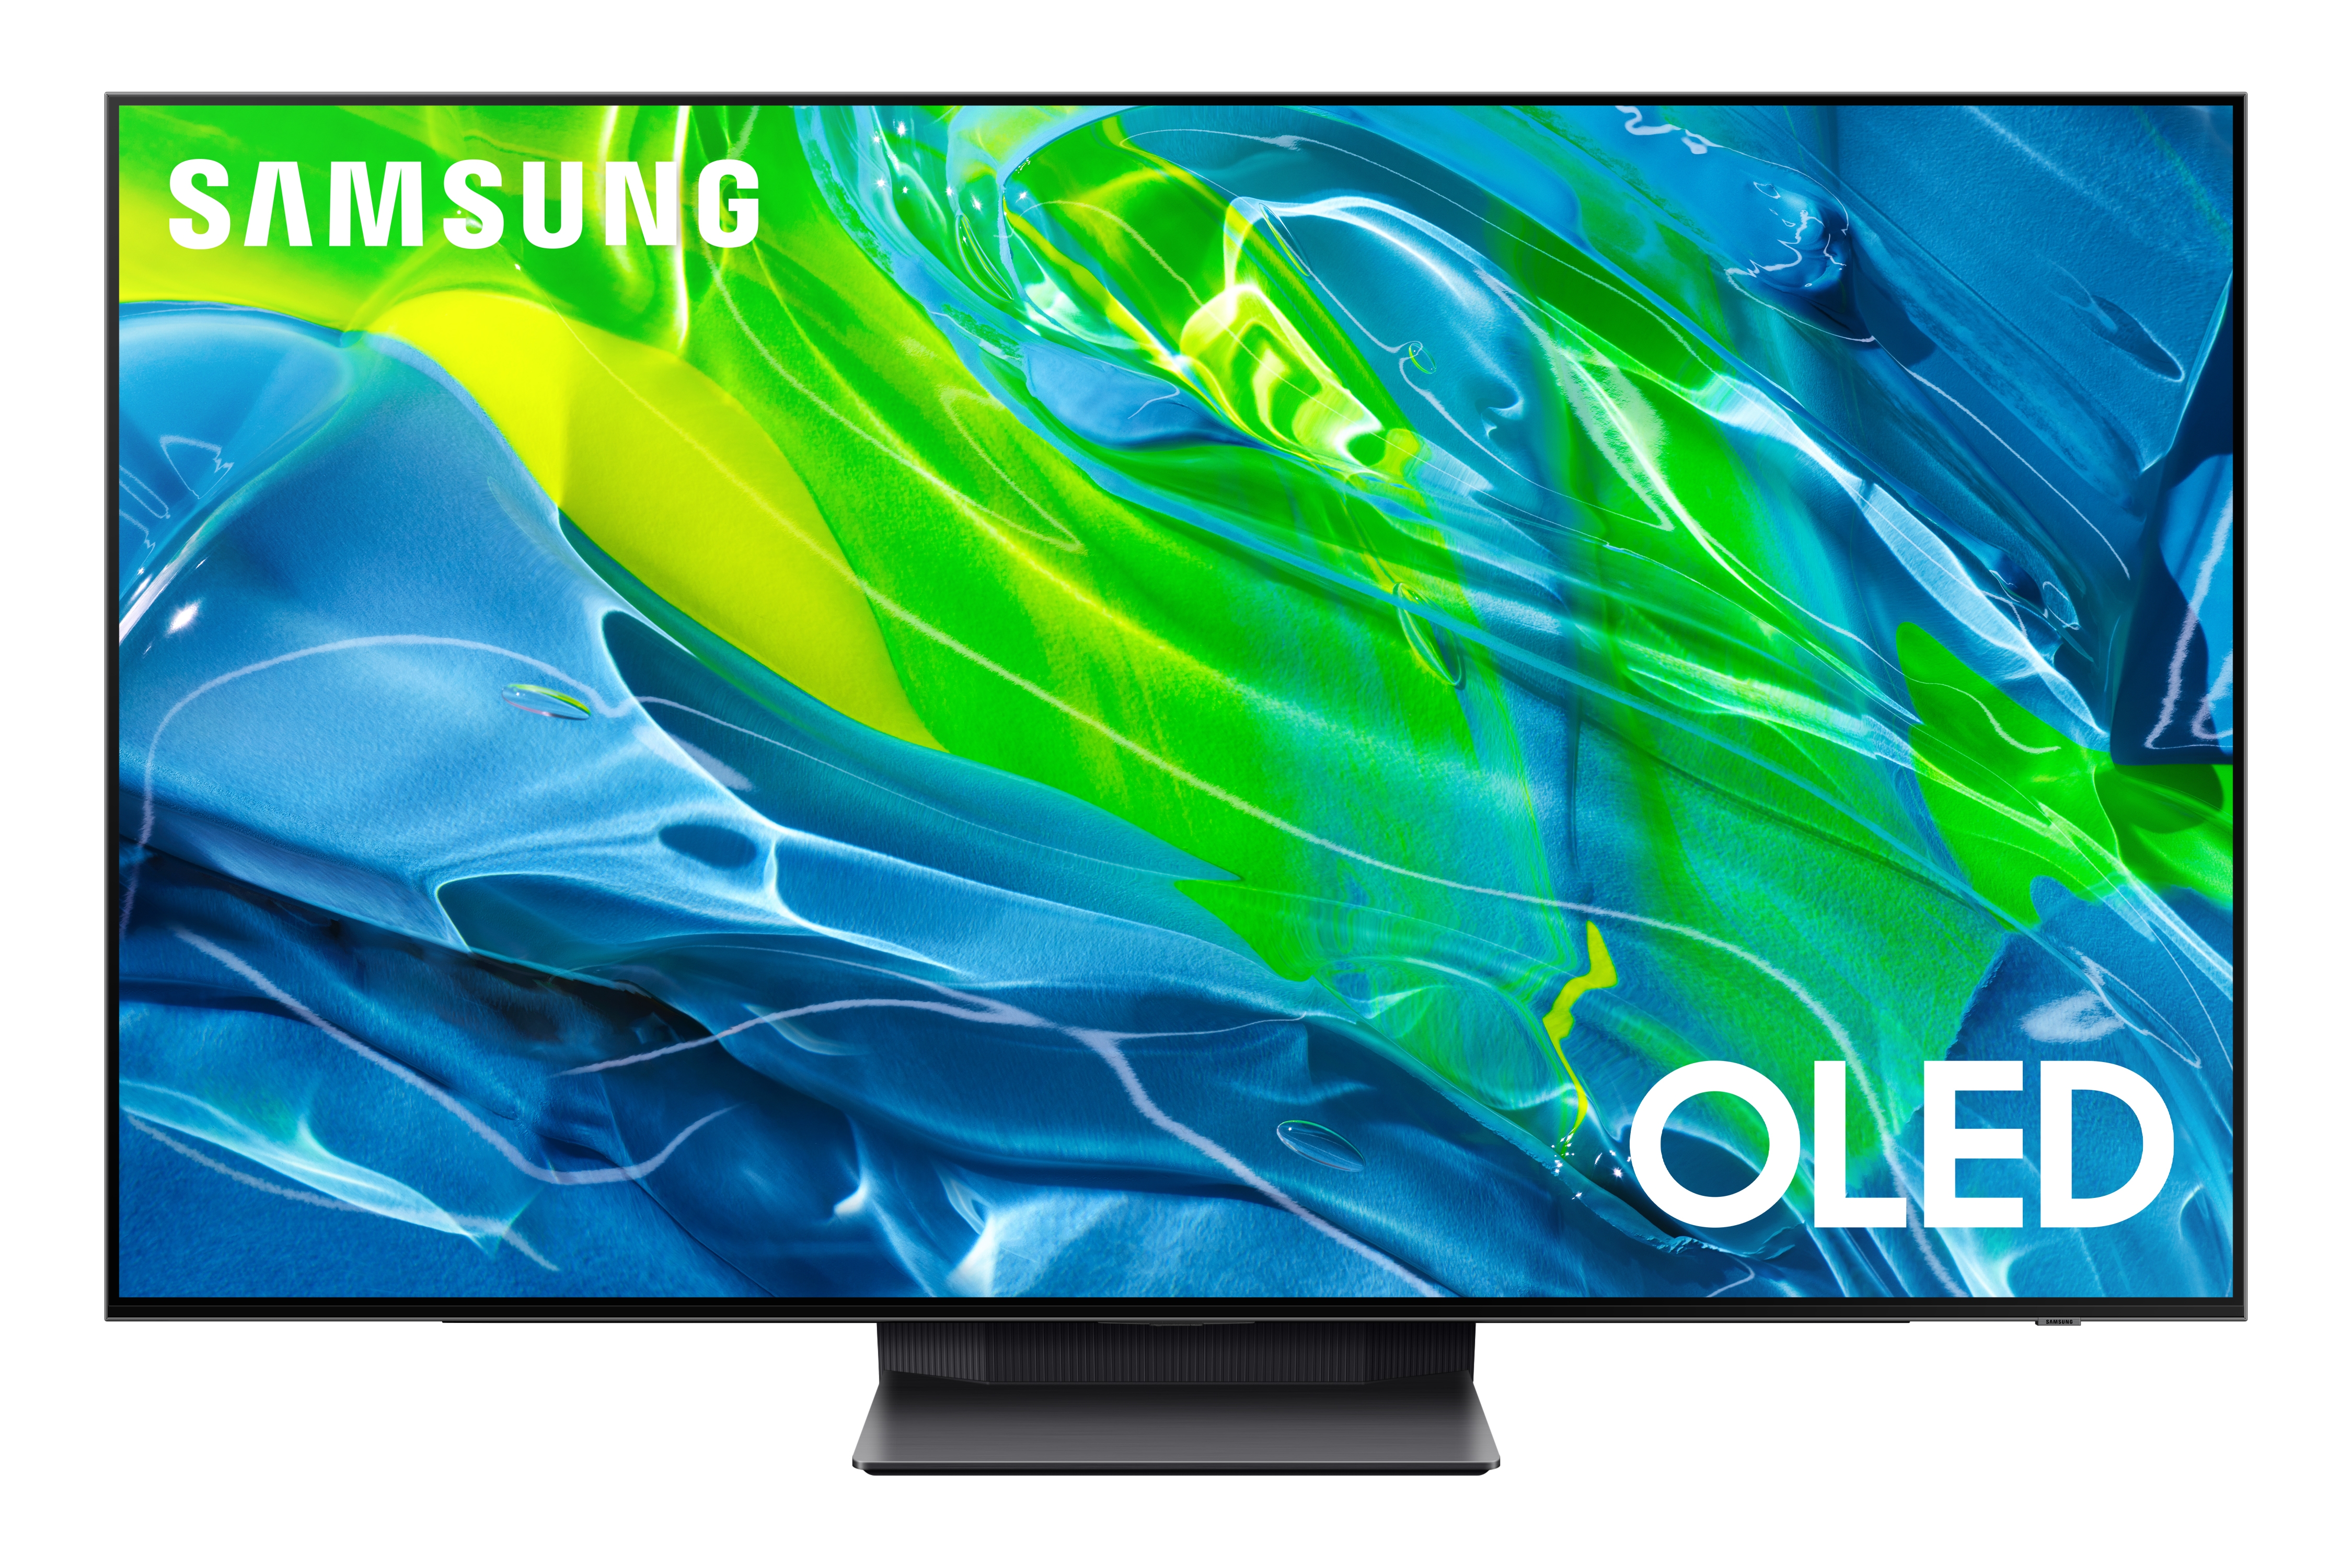 Samsung 65-inch QN90B QLED TV review: The best TV for brightly lit spaces